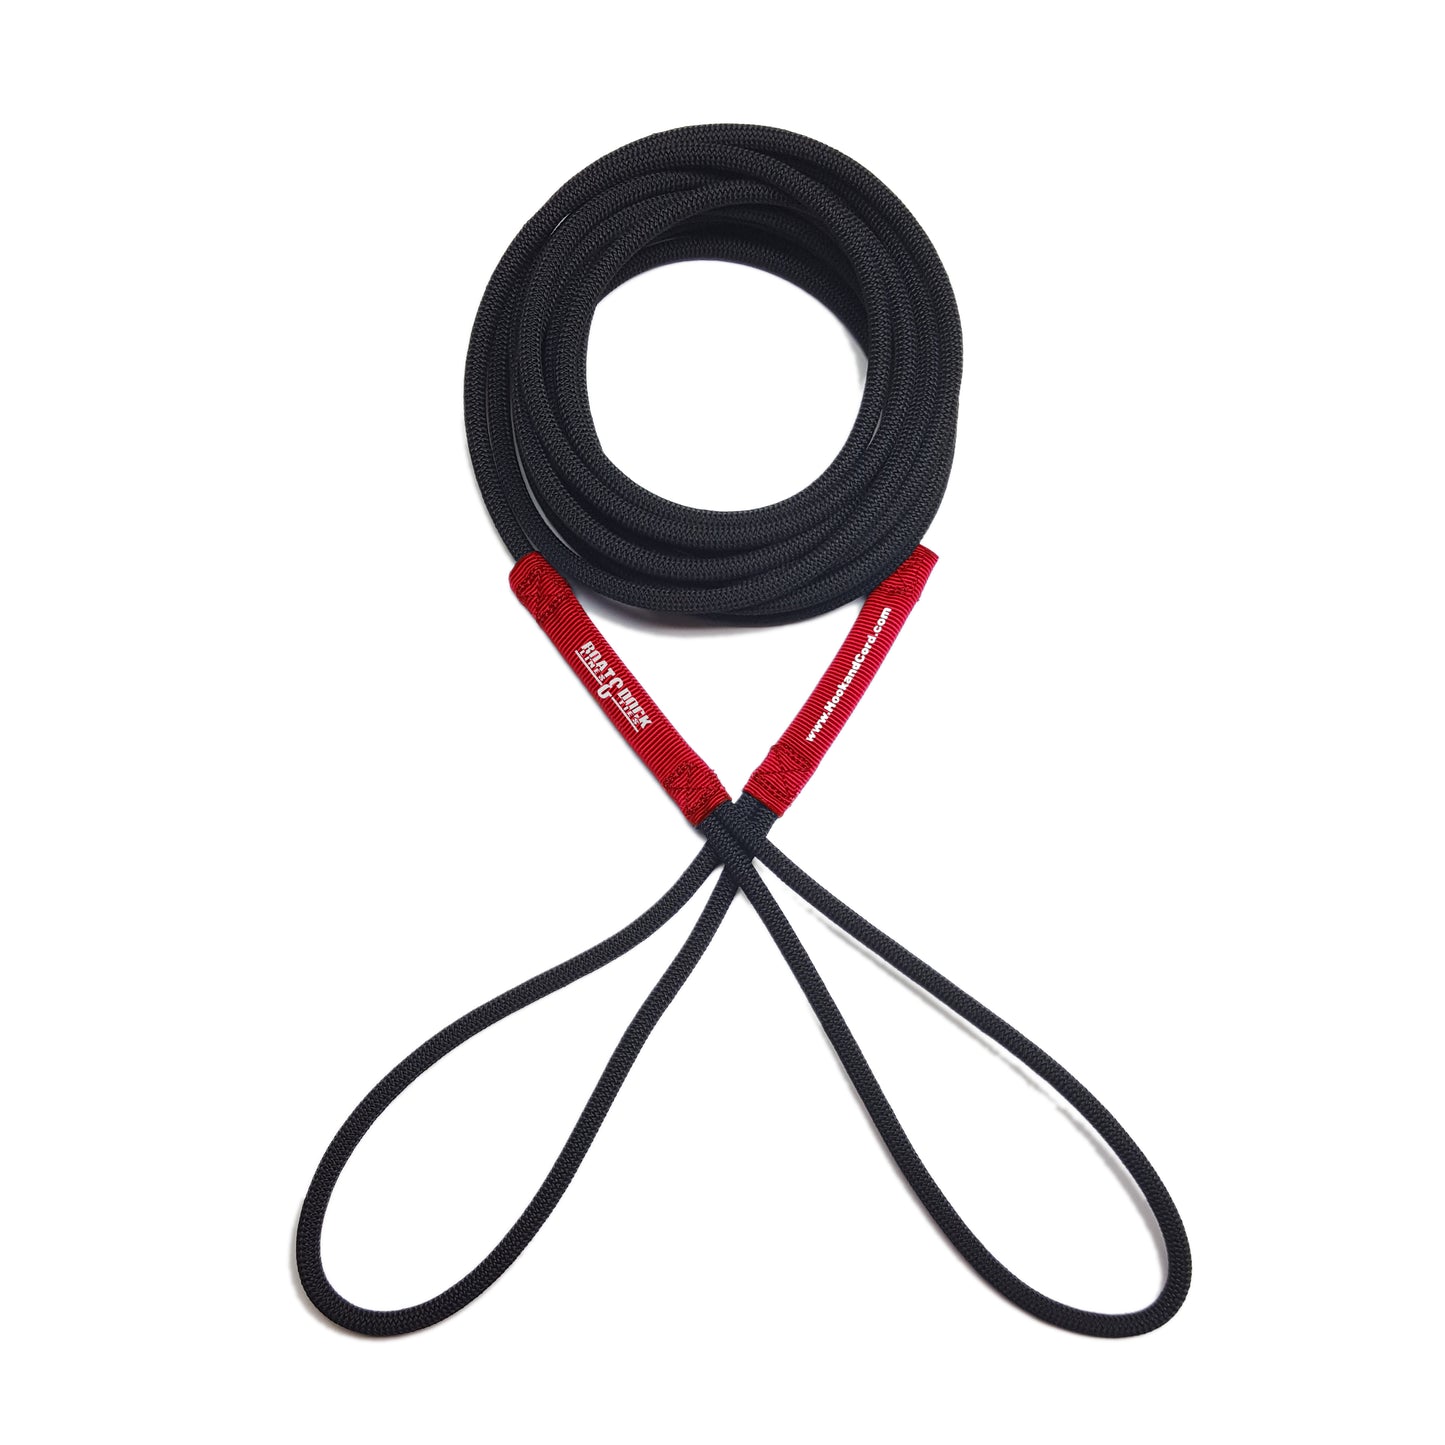  Boat Line Rope Bungee Cord Stretches to Double its